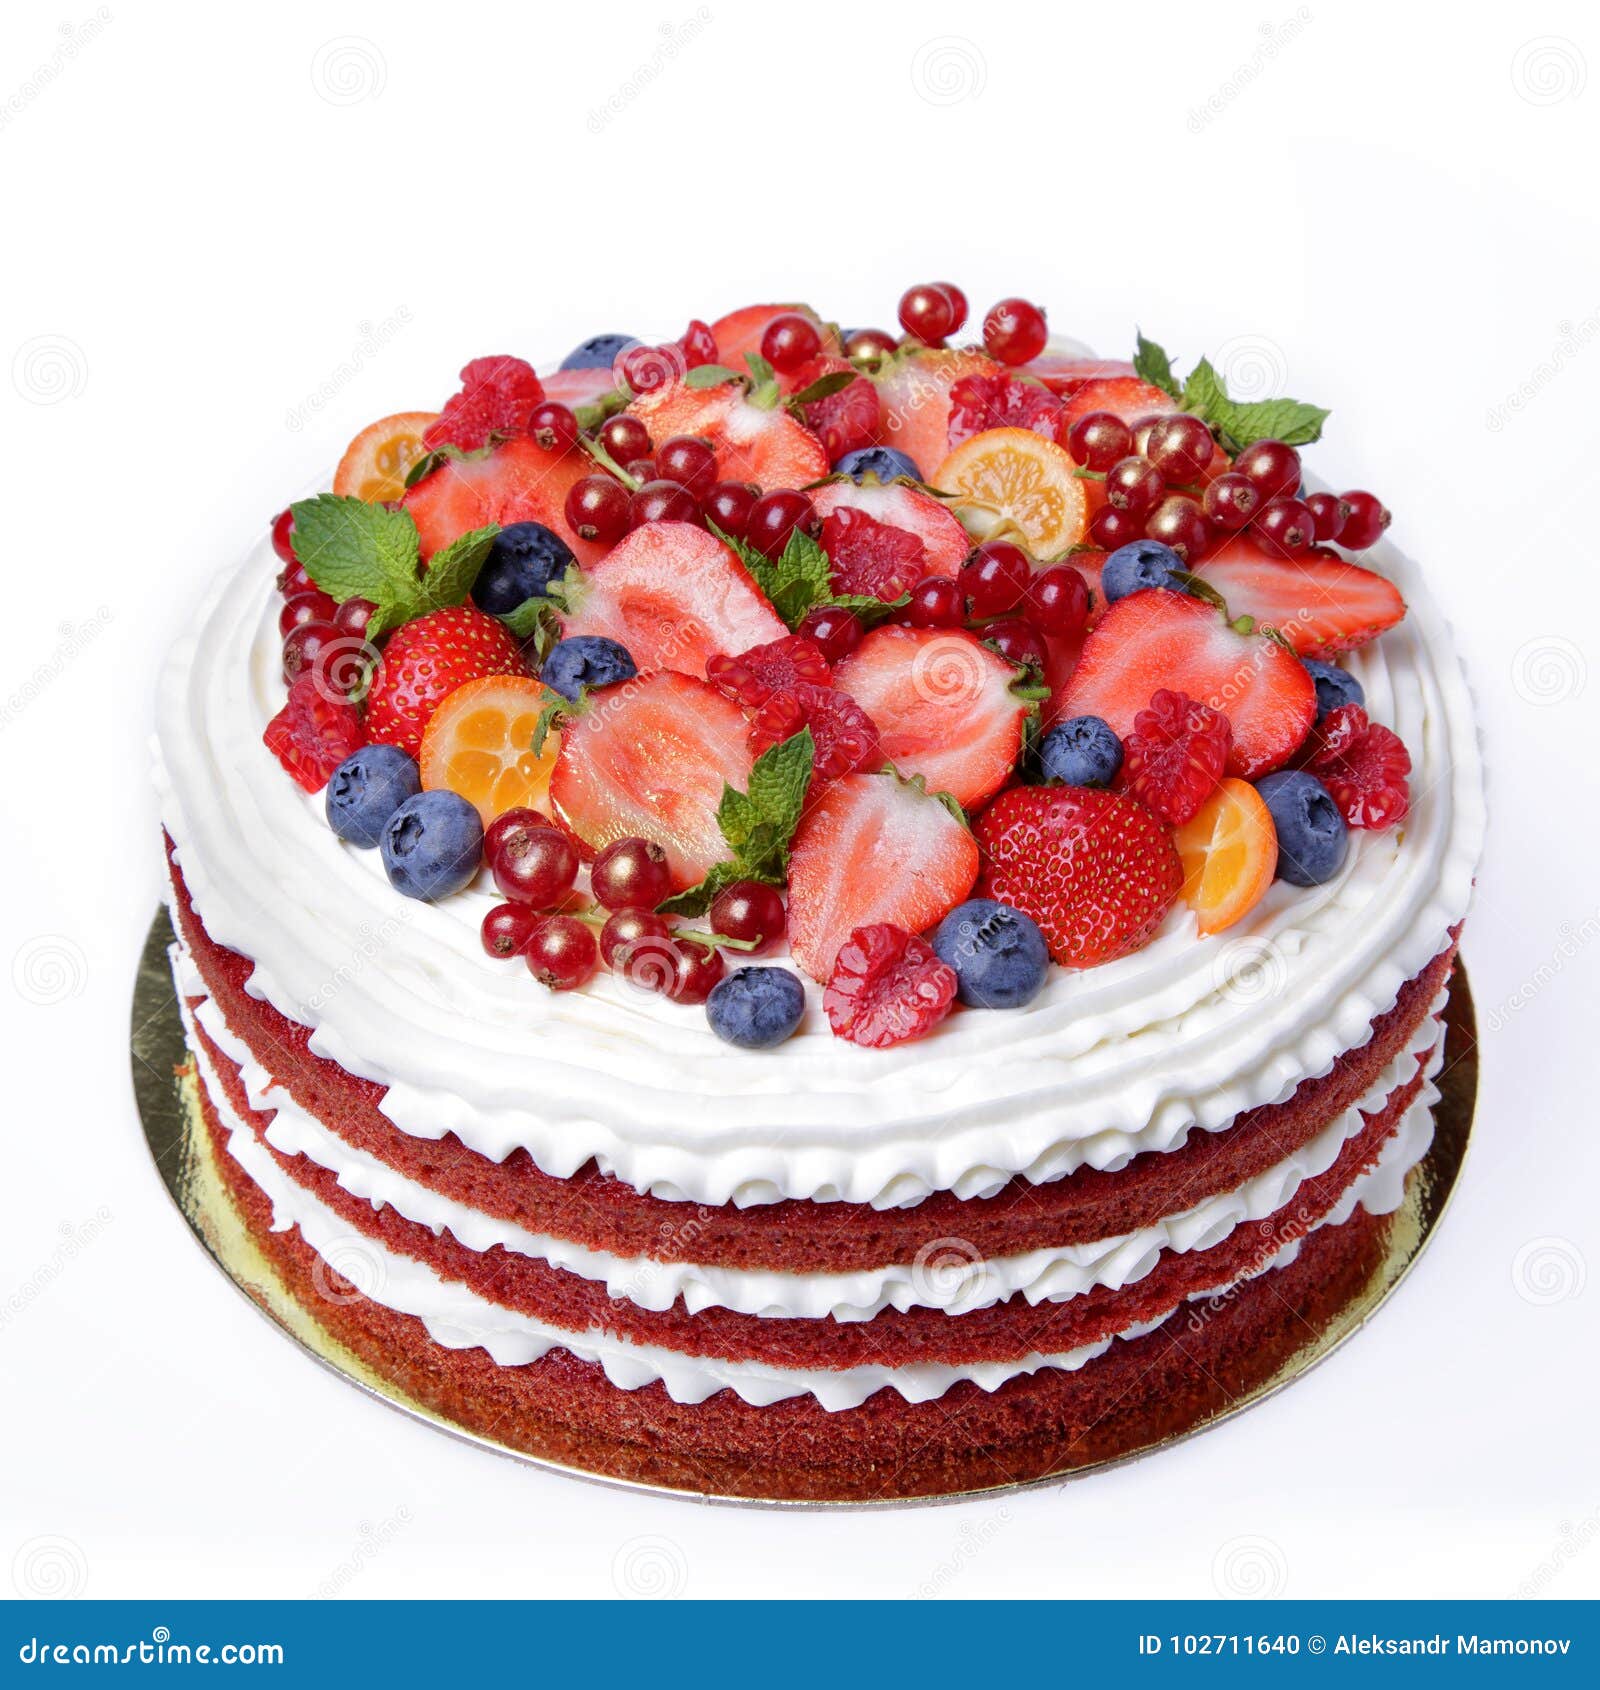 Cake Red Velvet Decorated with Berries and Fruits Stock Photo - Image ...